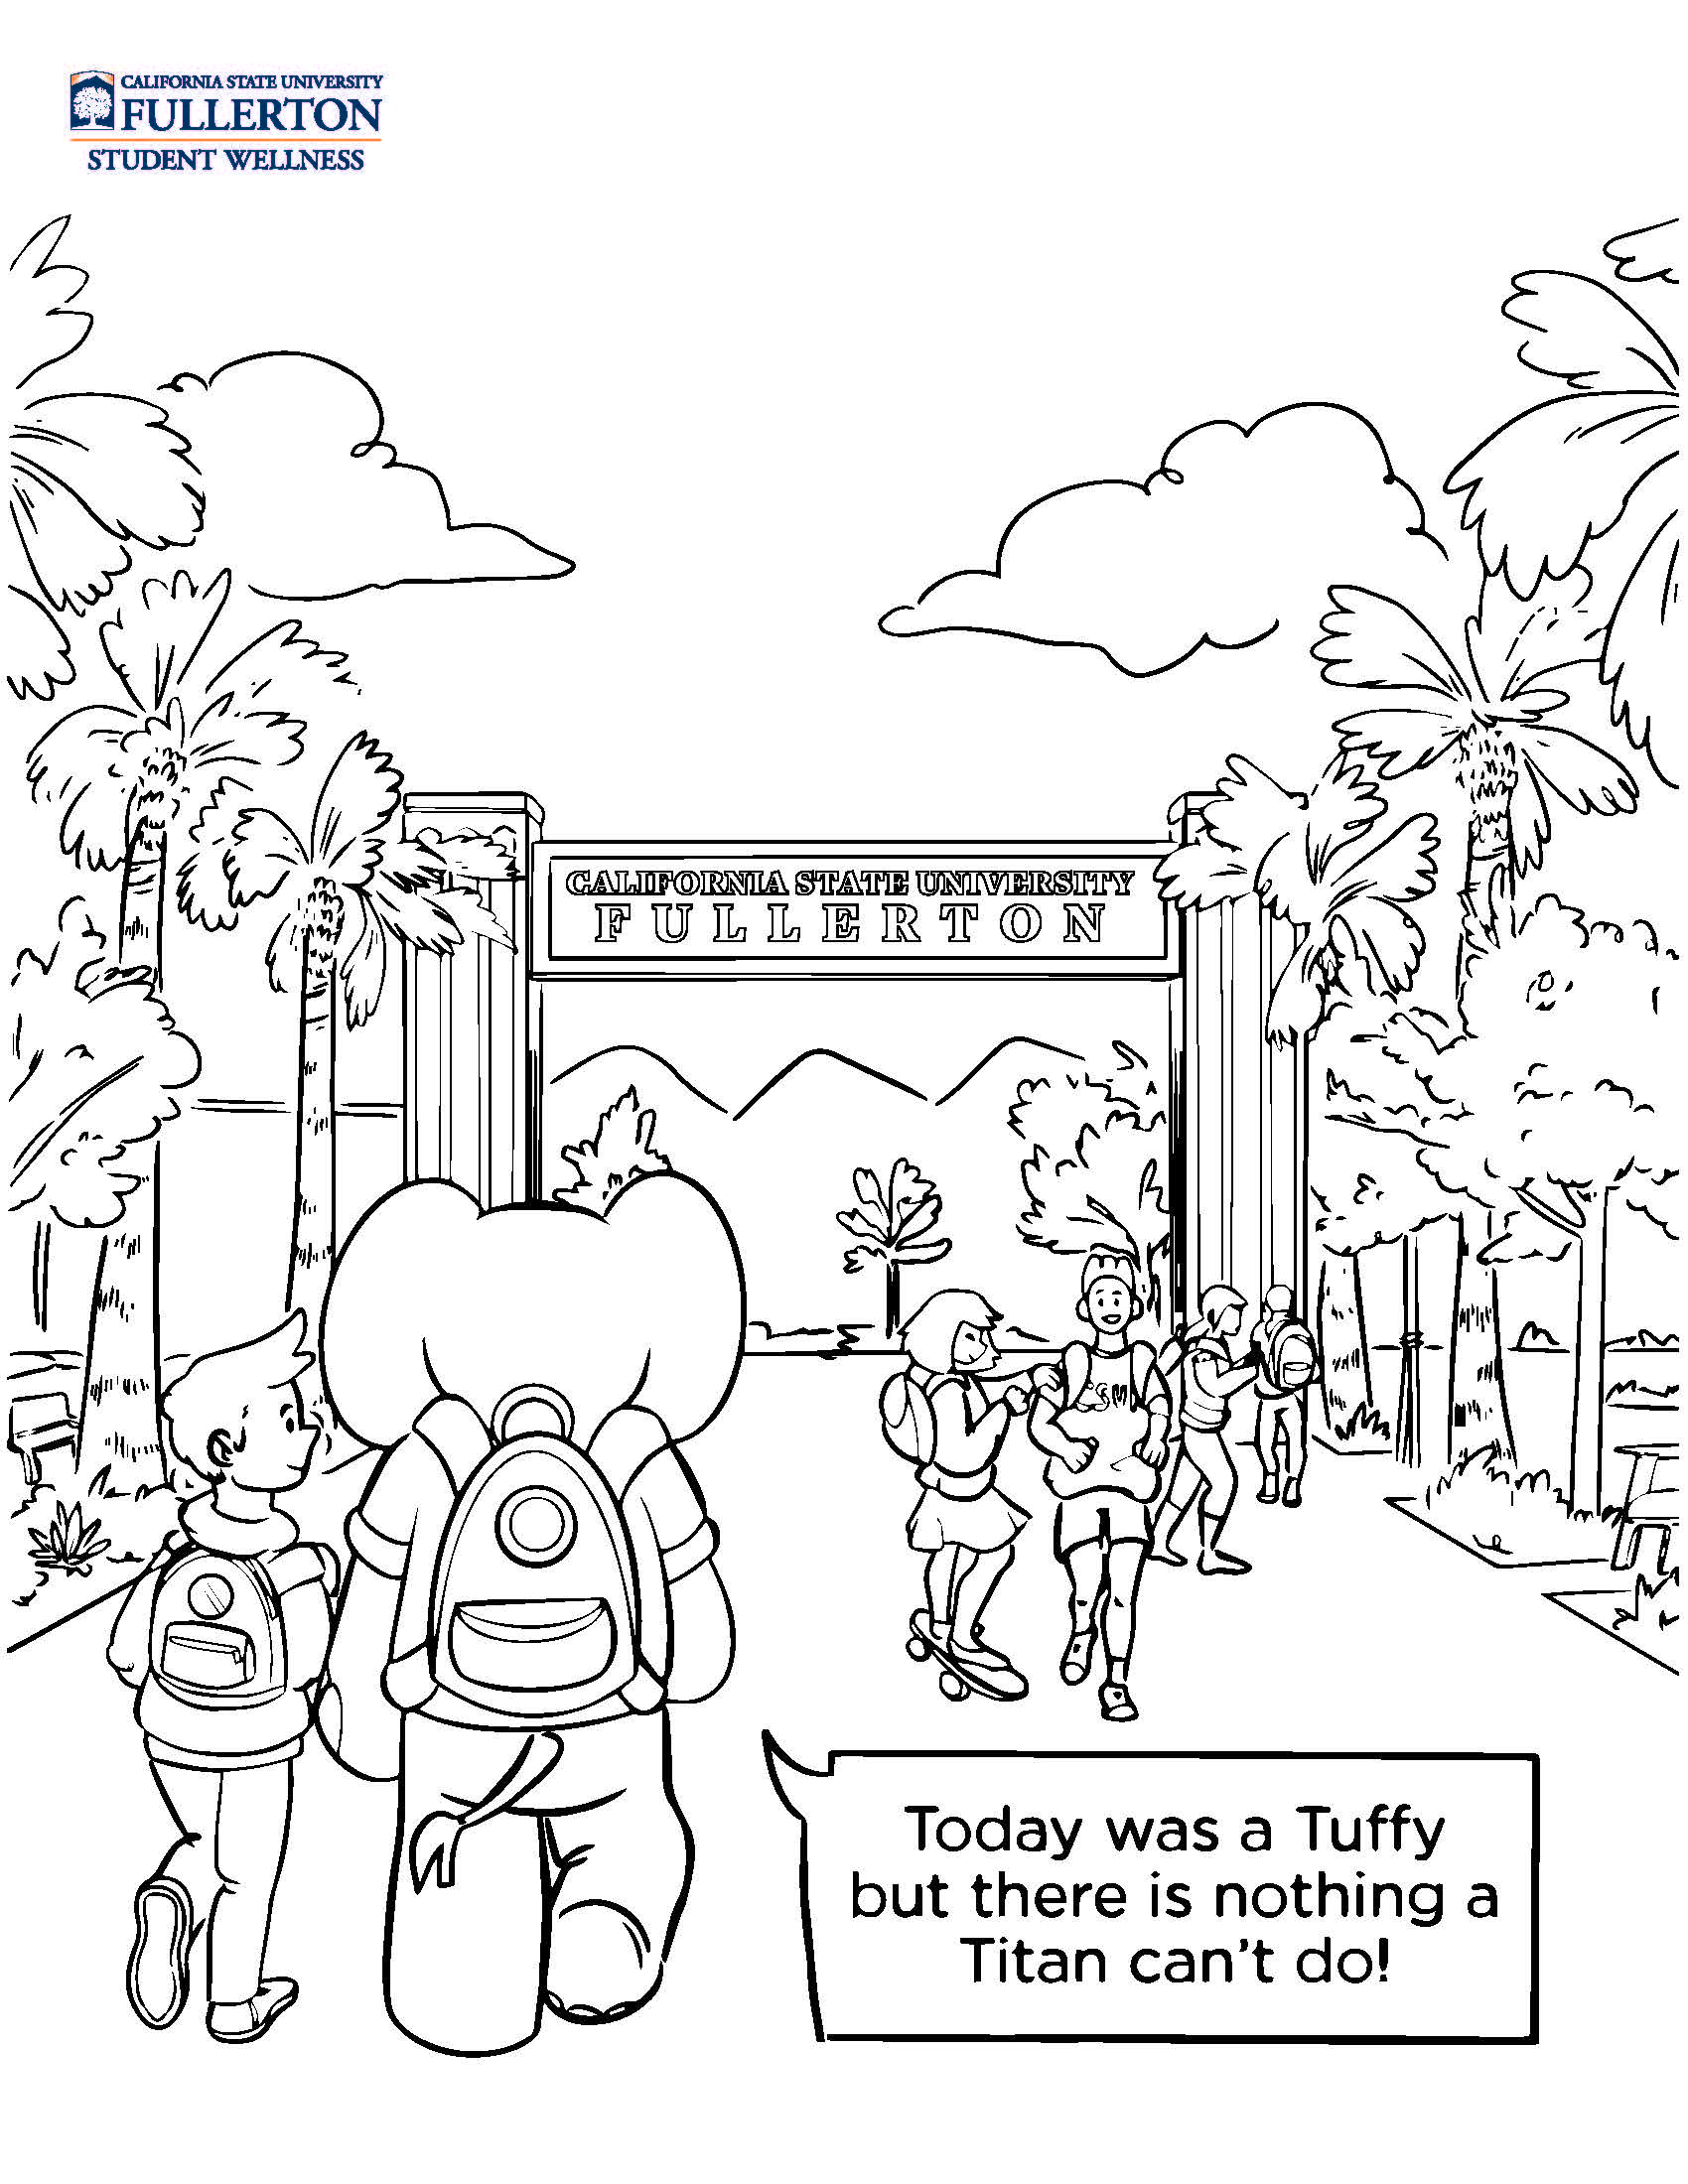 Coloring Pages 3 - Titanwalk